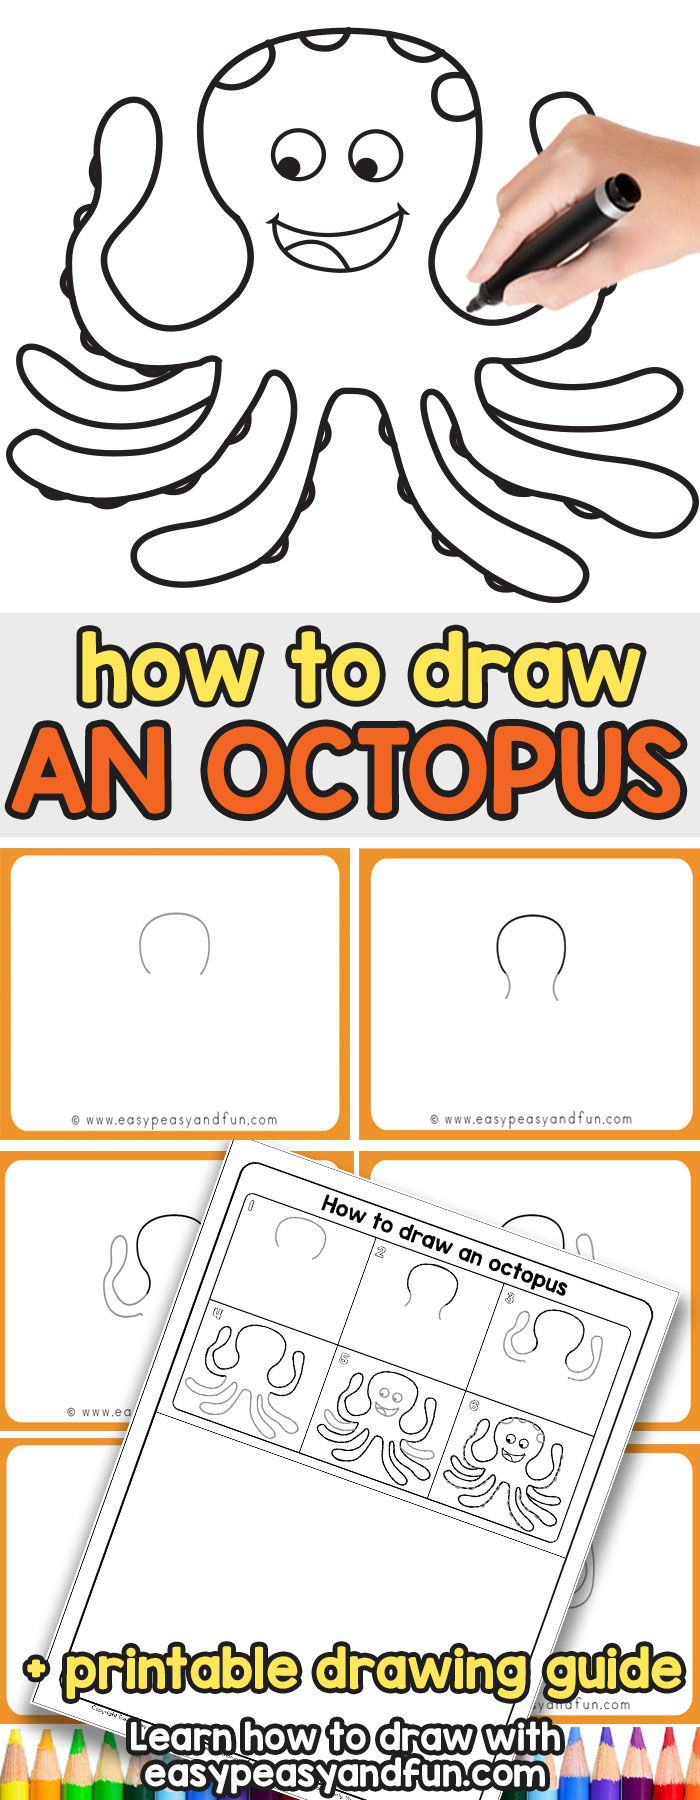 How to Draw a Cartoon Octopus - step by step drawing tutorial for kids